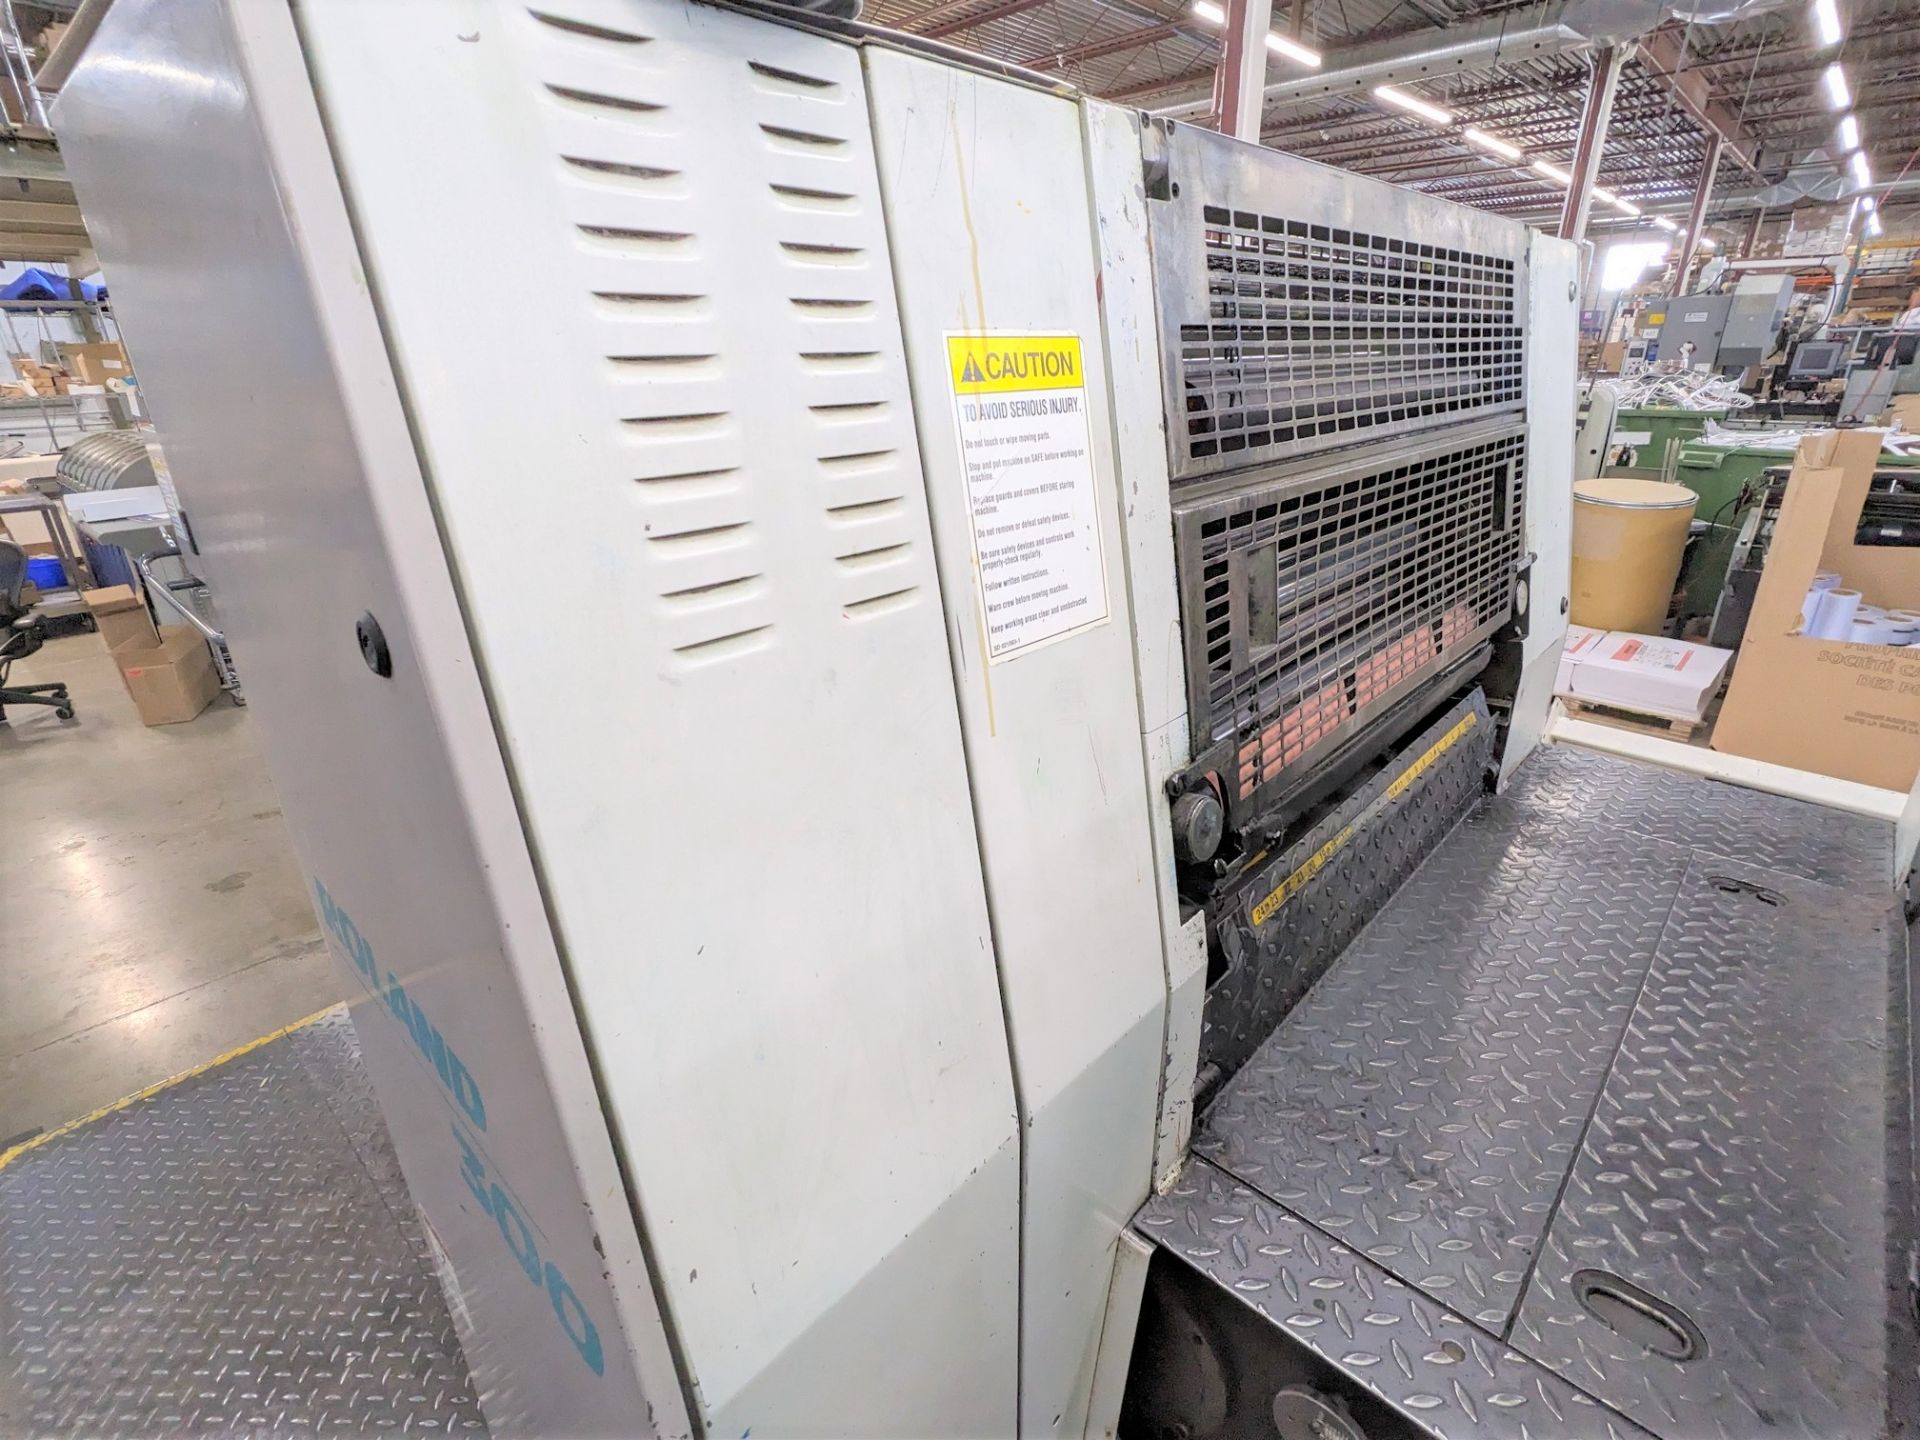 1995 MAN ROLAND 300 6-COLOUR OFFSET PRINTING PRESS, MODEL R306, S/N 25152B, TOTAL SHEET COUNT - Image 44 of 53